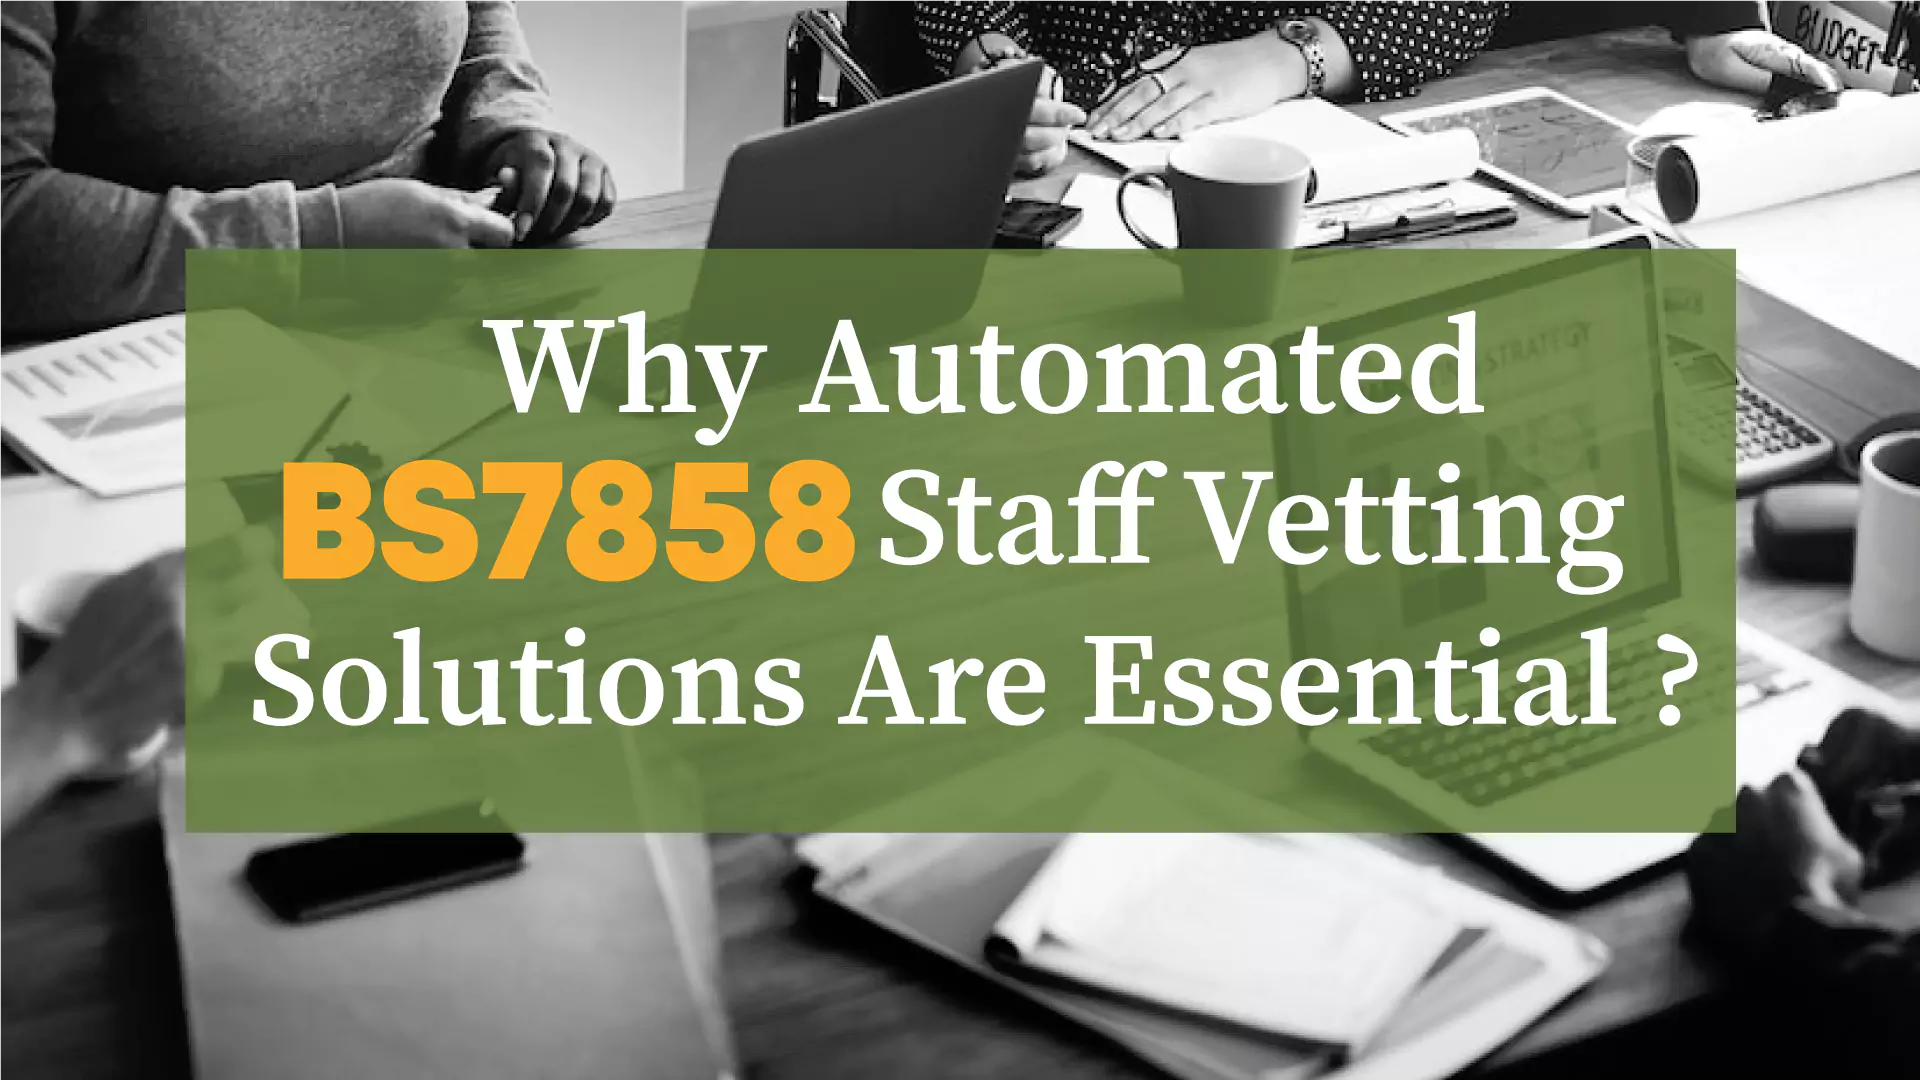 Why Automated BS7858 Staff Vetting Solutions are Essential